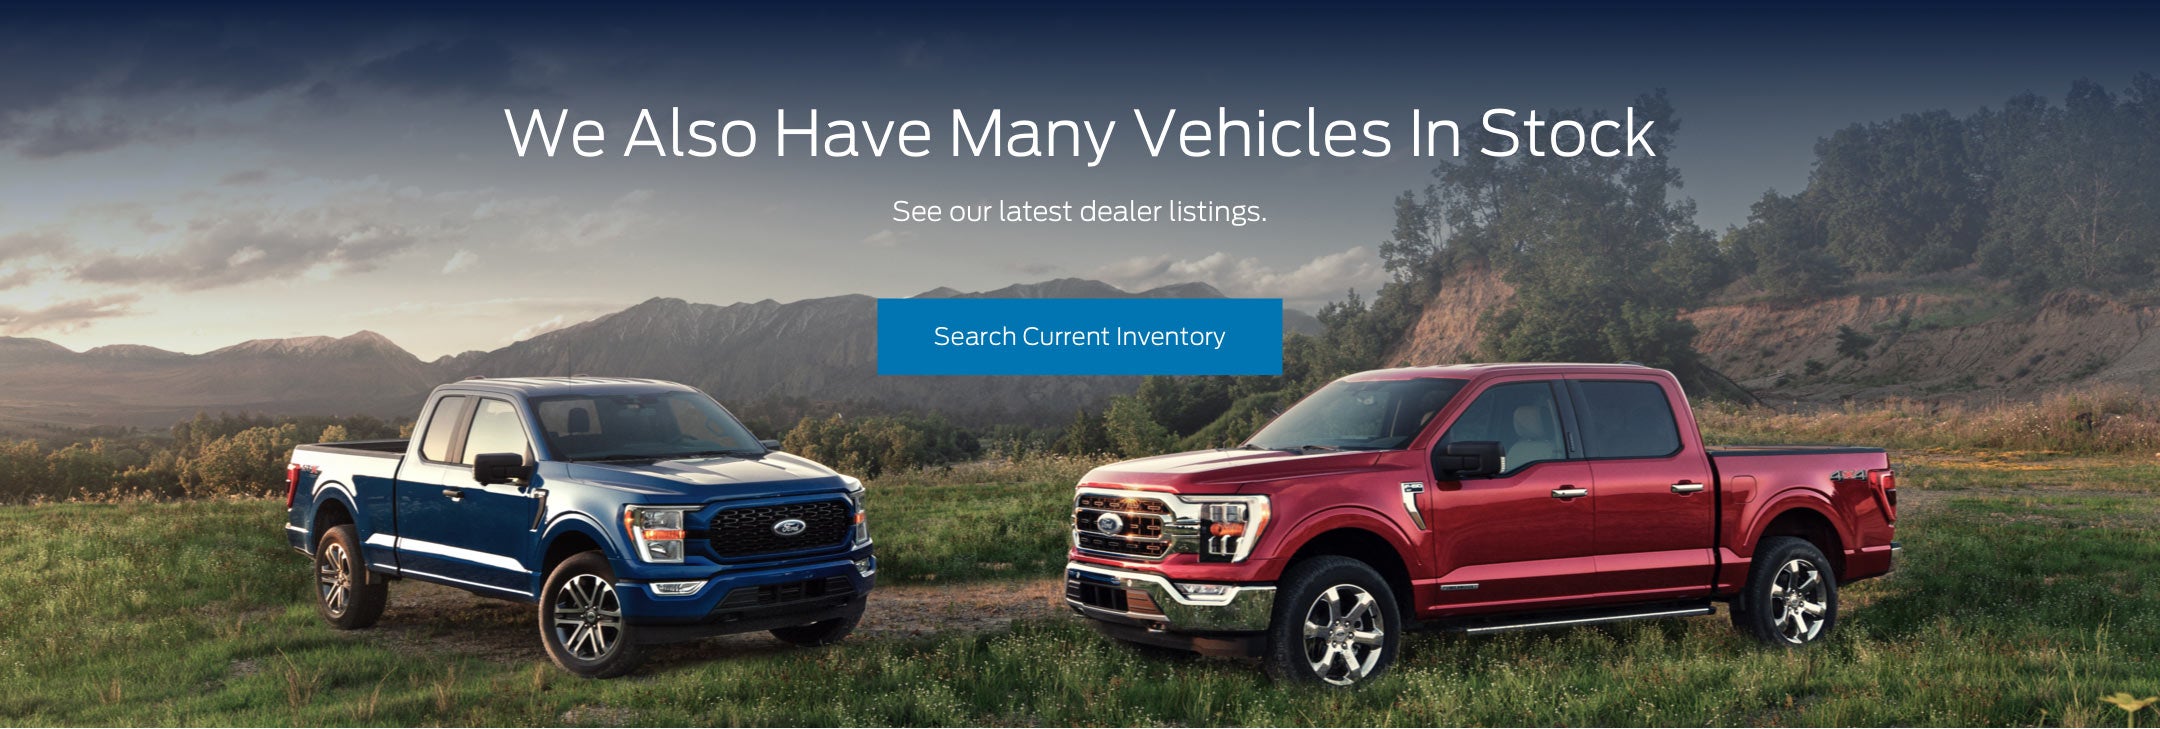 Ford vehicles in stock | Duncan Ford in Rocky Mount VA